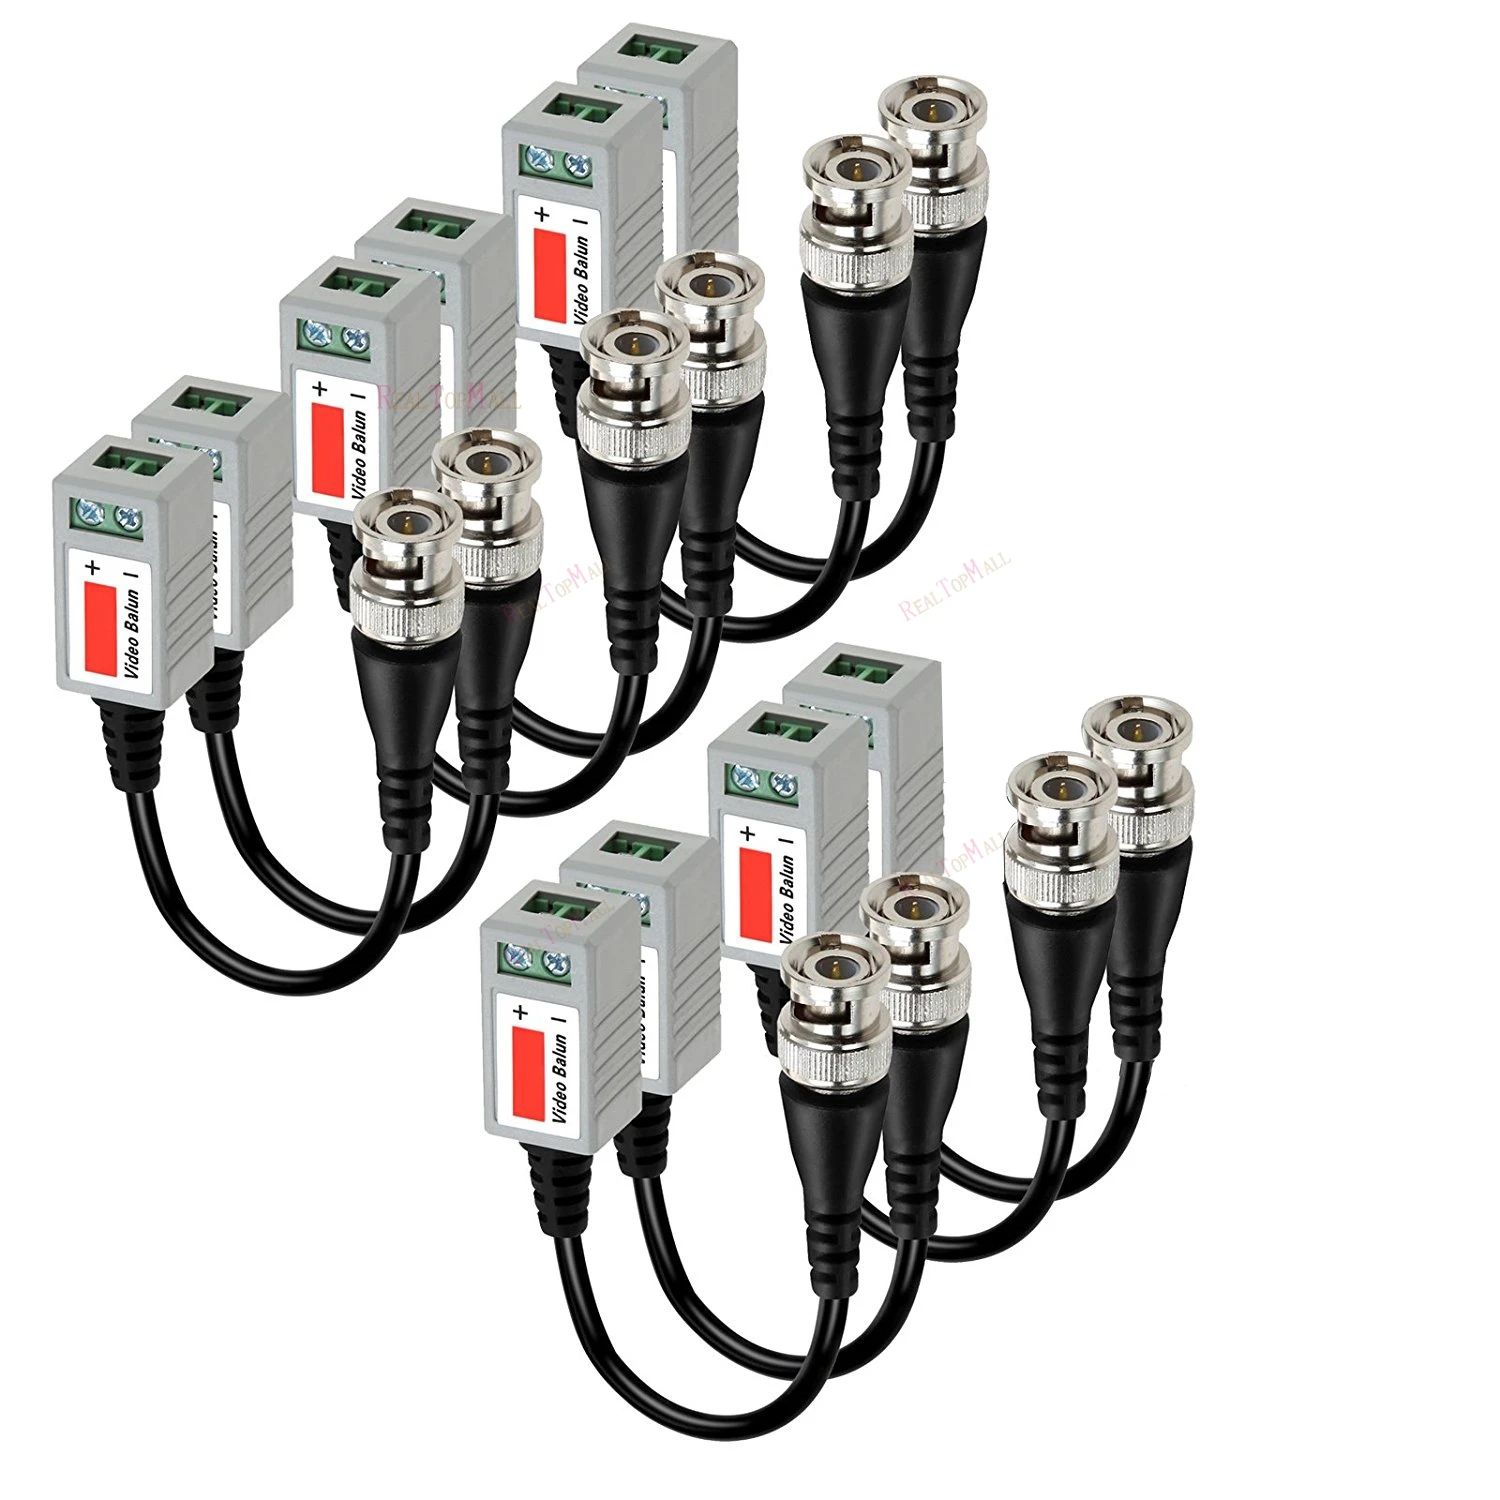 New 10 Pcs (5 pairs)CCTV Camera Passive Video Balun BNC Connector Coaxial Cable Adapter